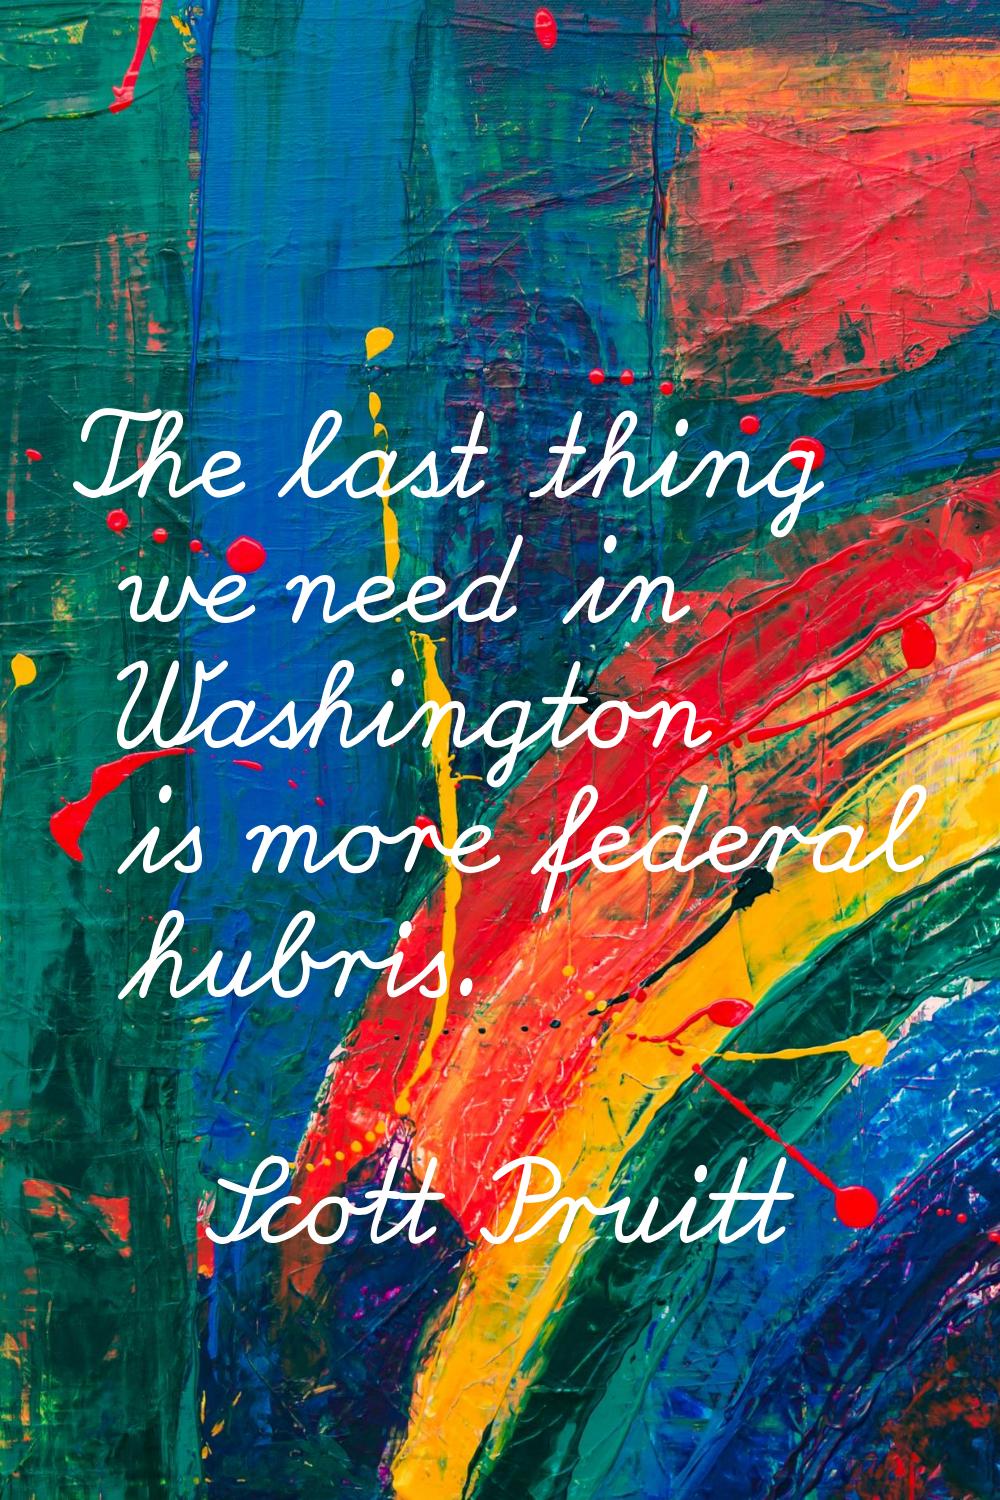 The last thing we need in Washington is more federal hubris.